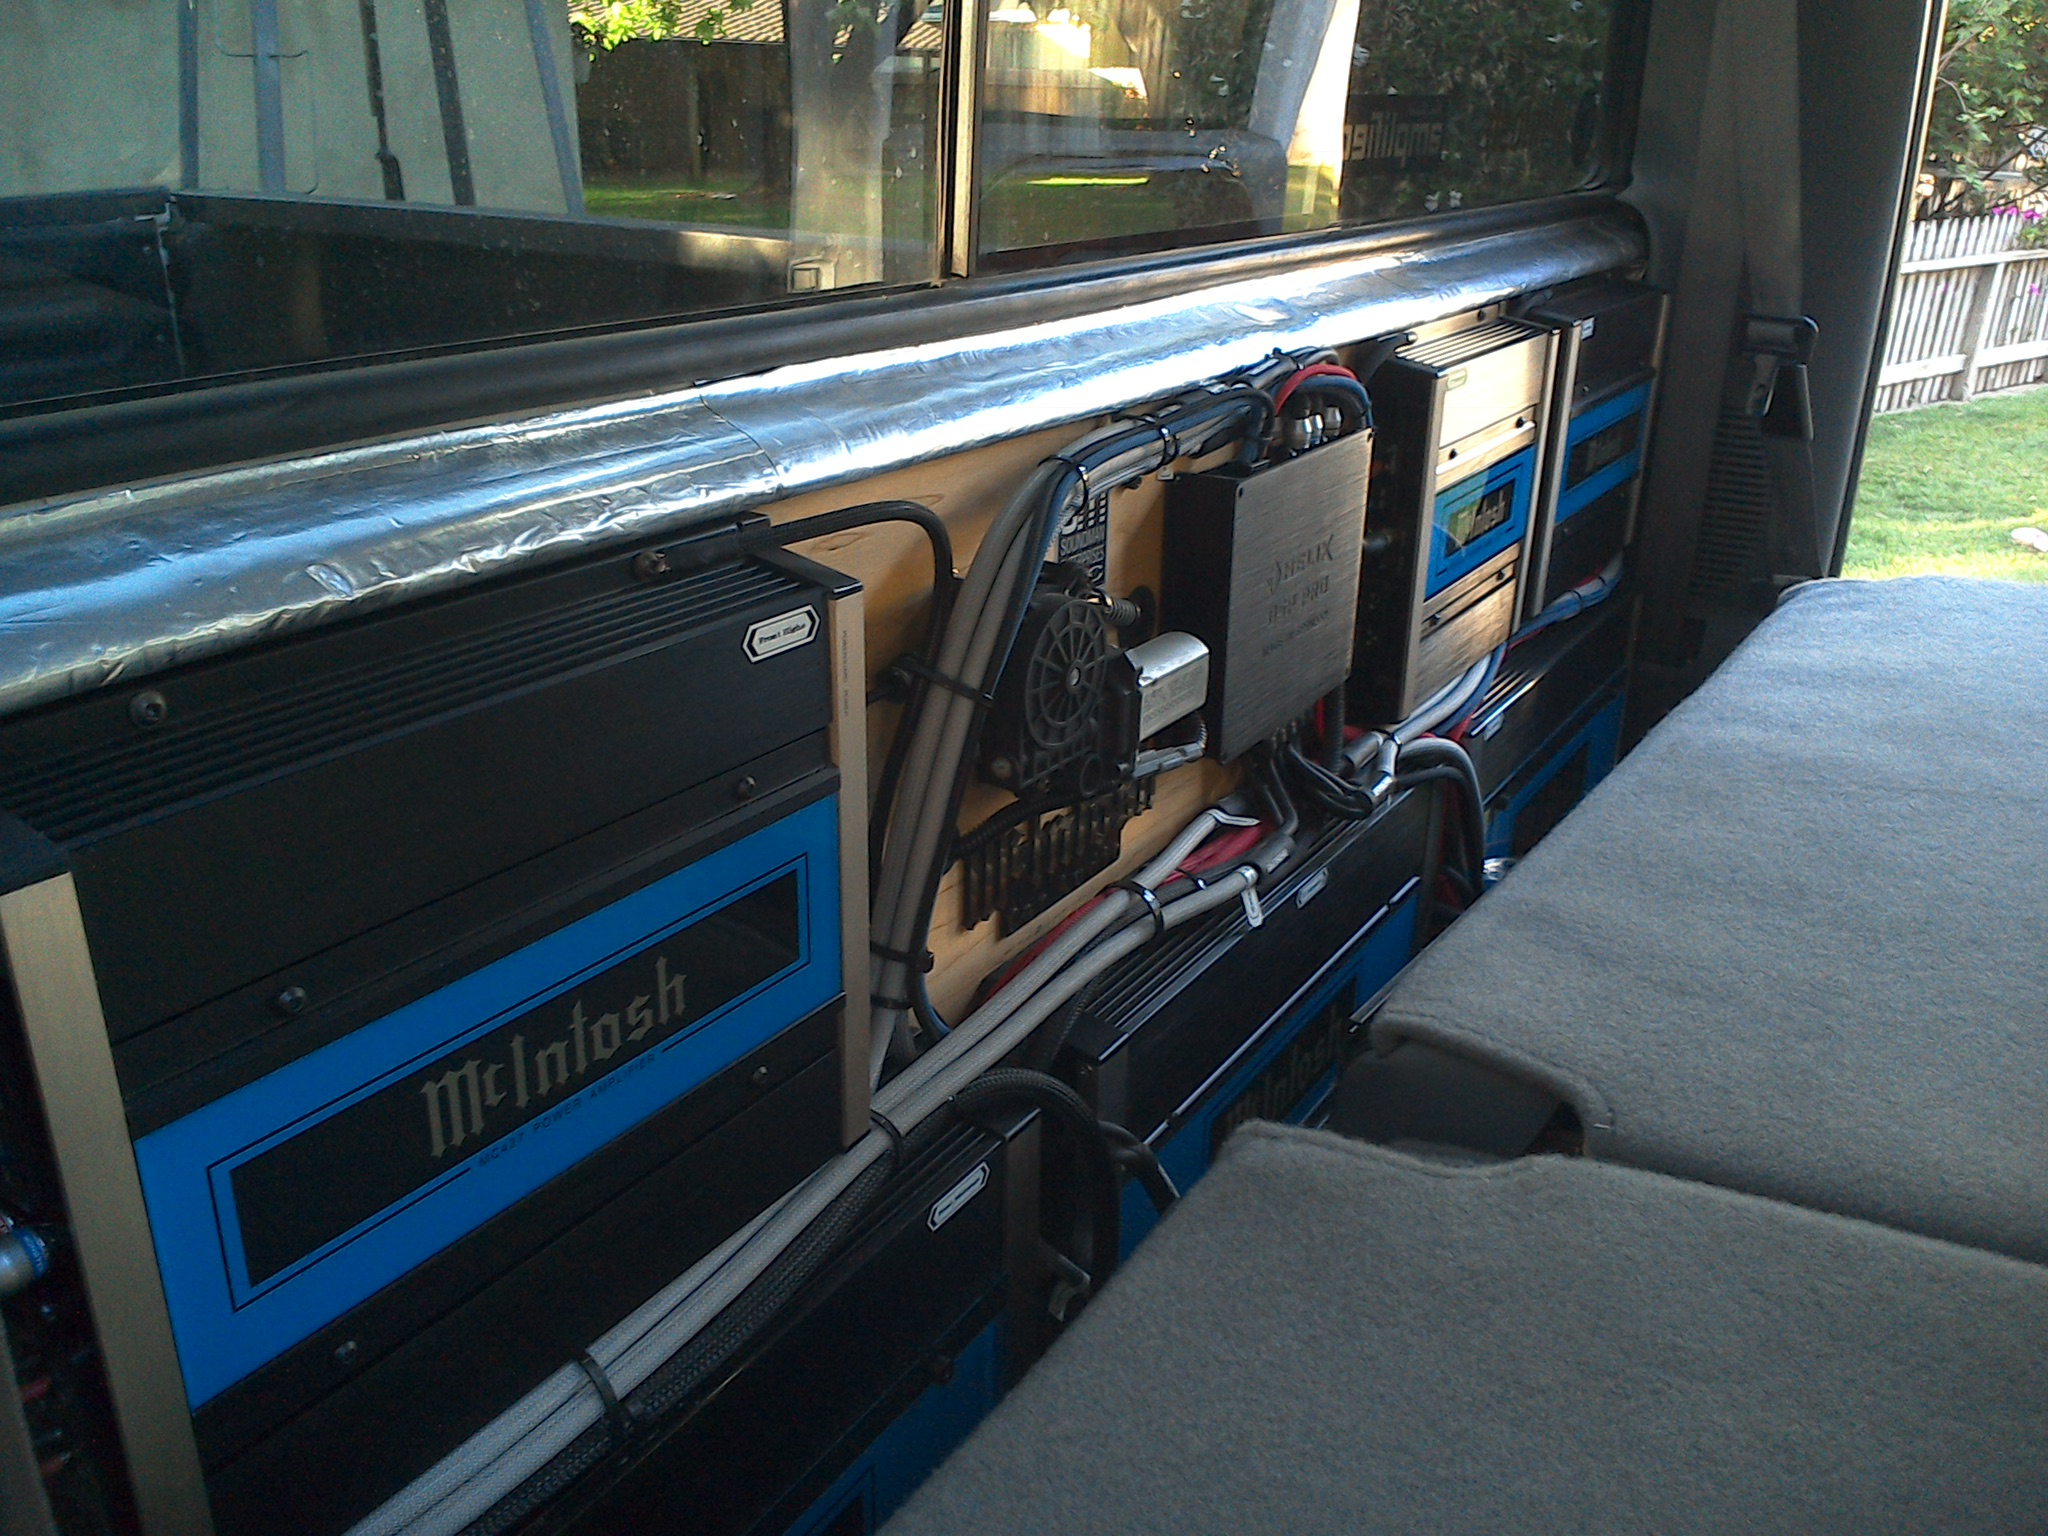 Truck stereo powered by 6 McIntosh amplifiers @ 2,400 Watts in 4 ohms